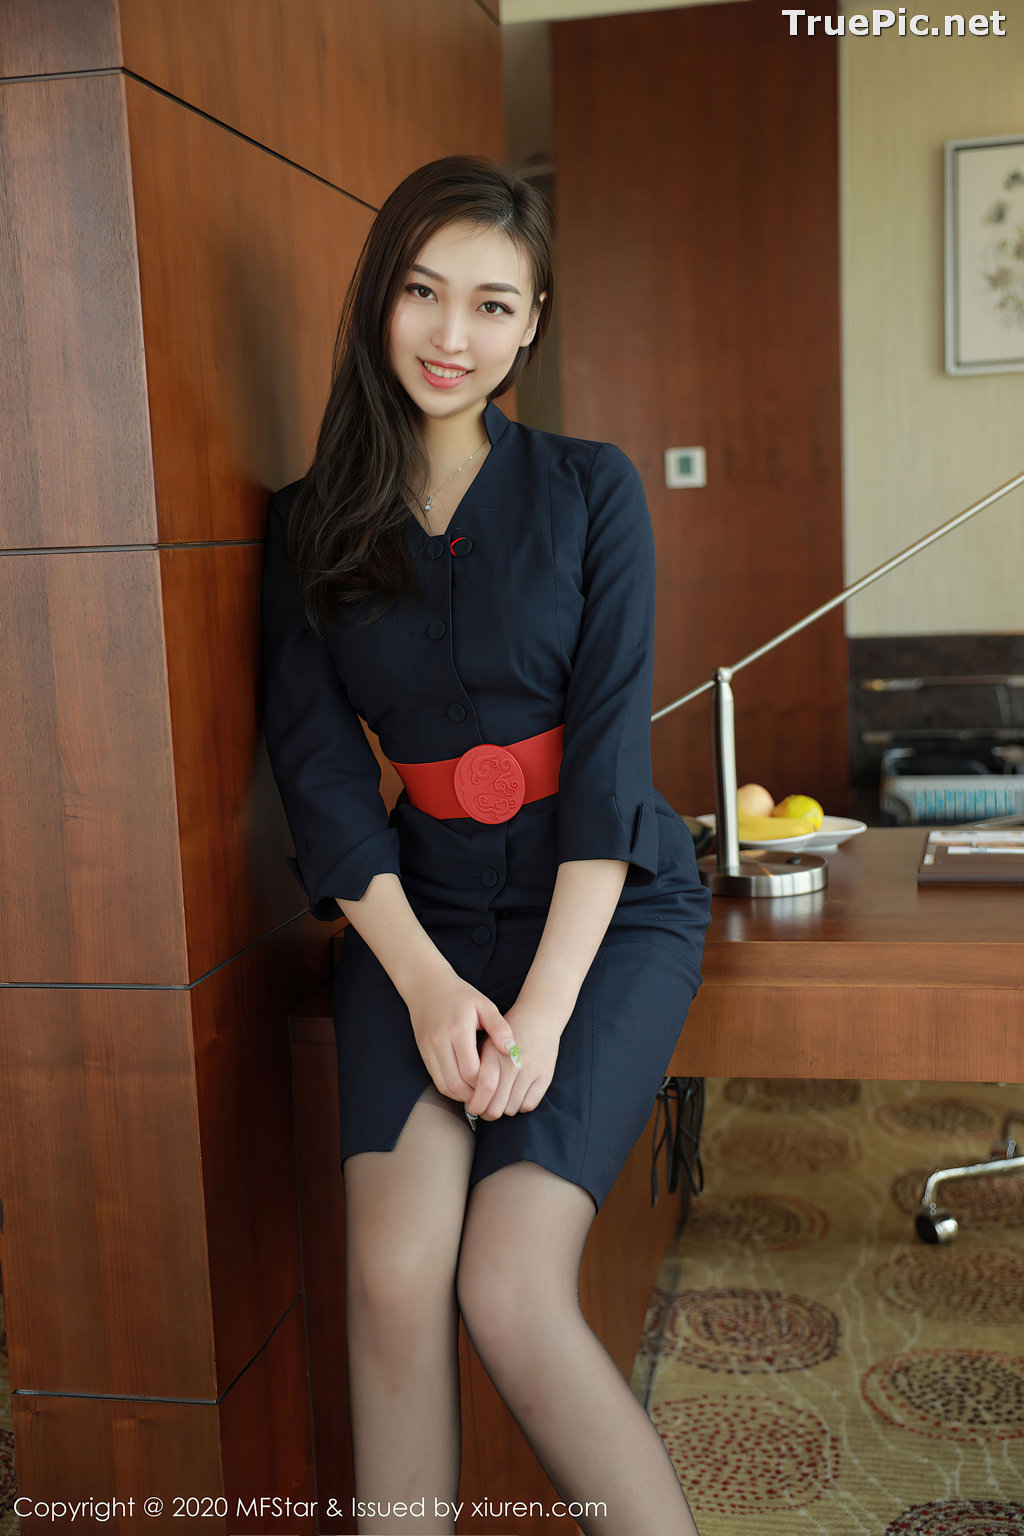 Image MFStar Vol.404 – Chinese Model – Zheng Ying Shan (郑颖姗) – Sexy Office Girl - TruePic.net - Picture-13